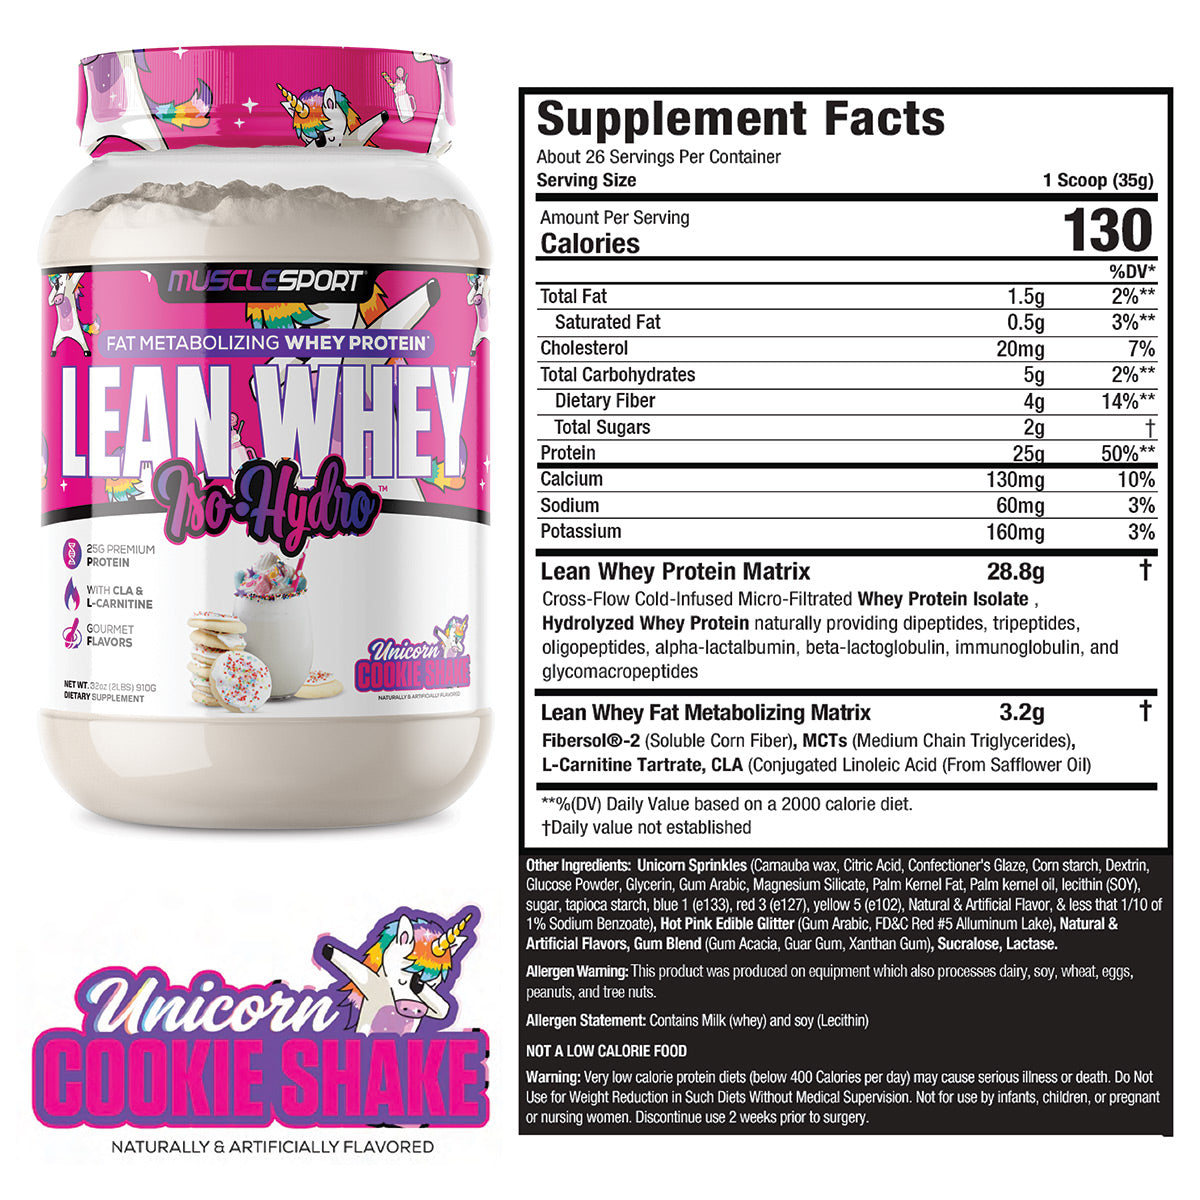 Unicorn Cookie Shake Lean Whey Supplement Facts